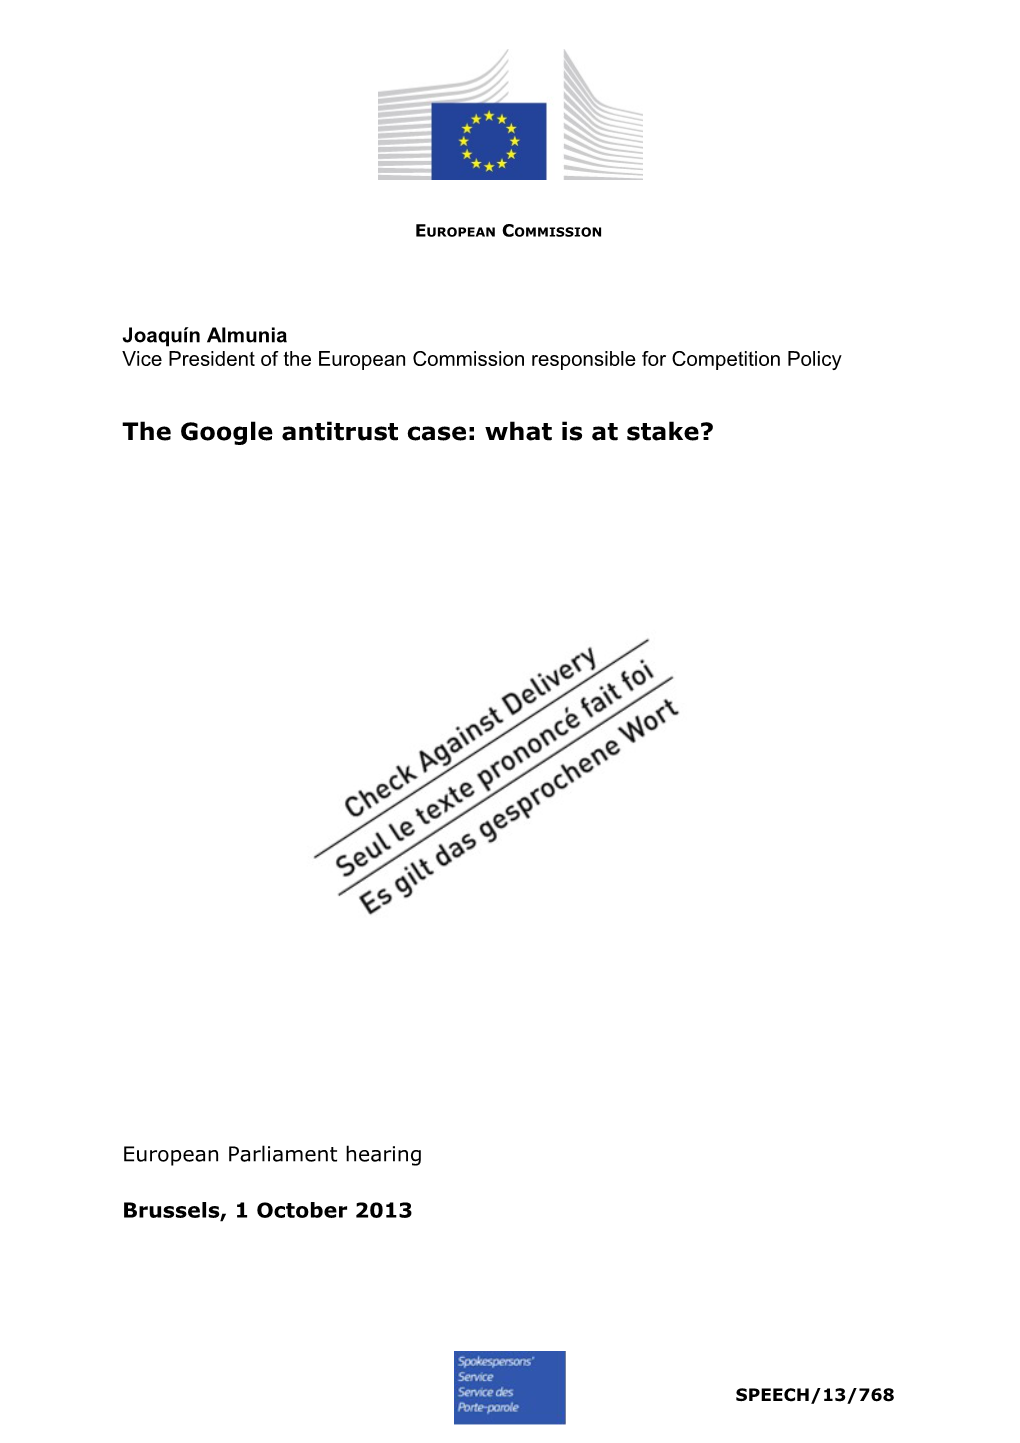 The Google Antitrust Case: What Is at Stake?